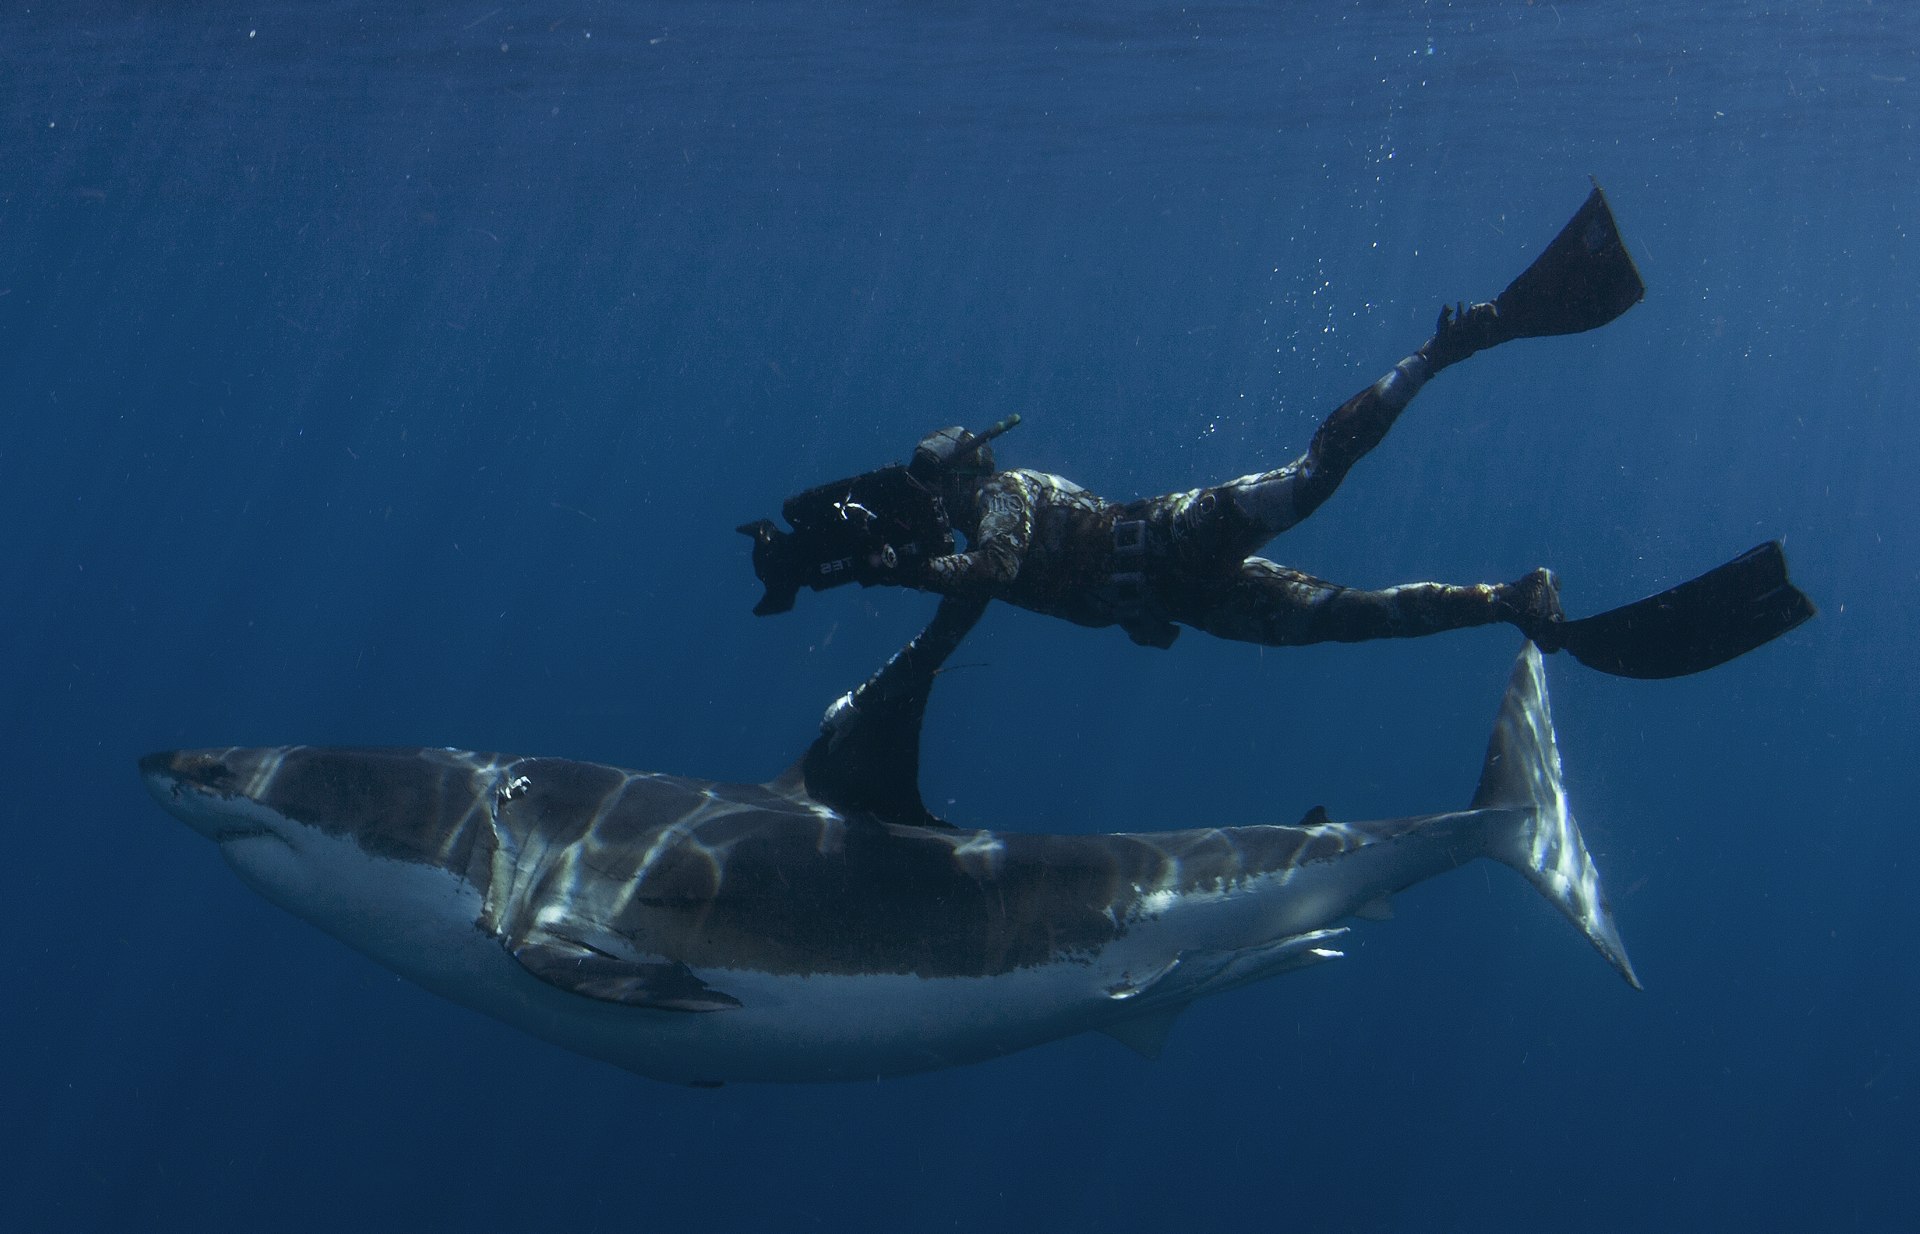 Underwater cinematographer Mark Rackley in a diving suit swings alongside a shark, holding onto its fin with one hand, with a camera pointed at the shark's face in the other.